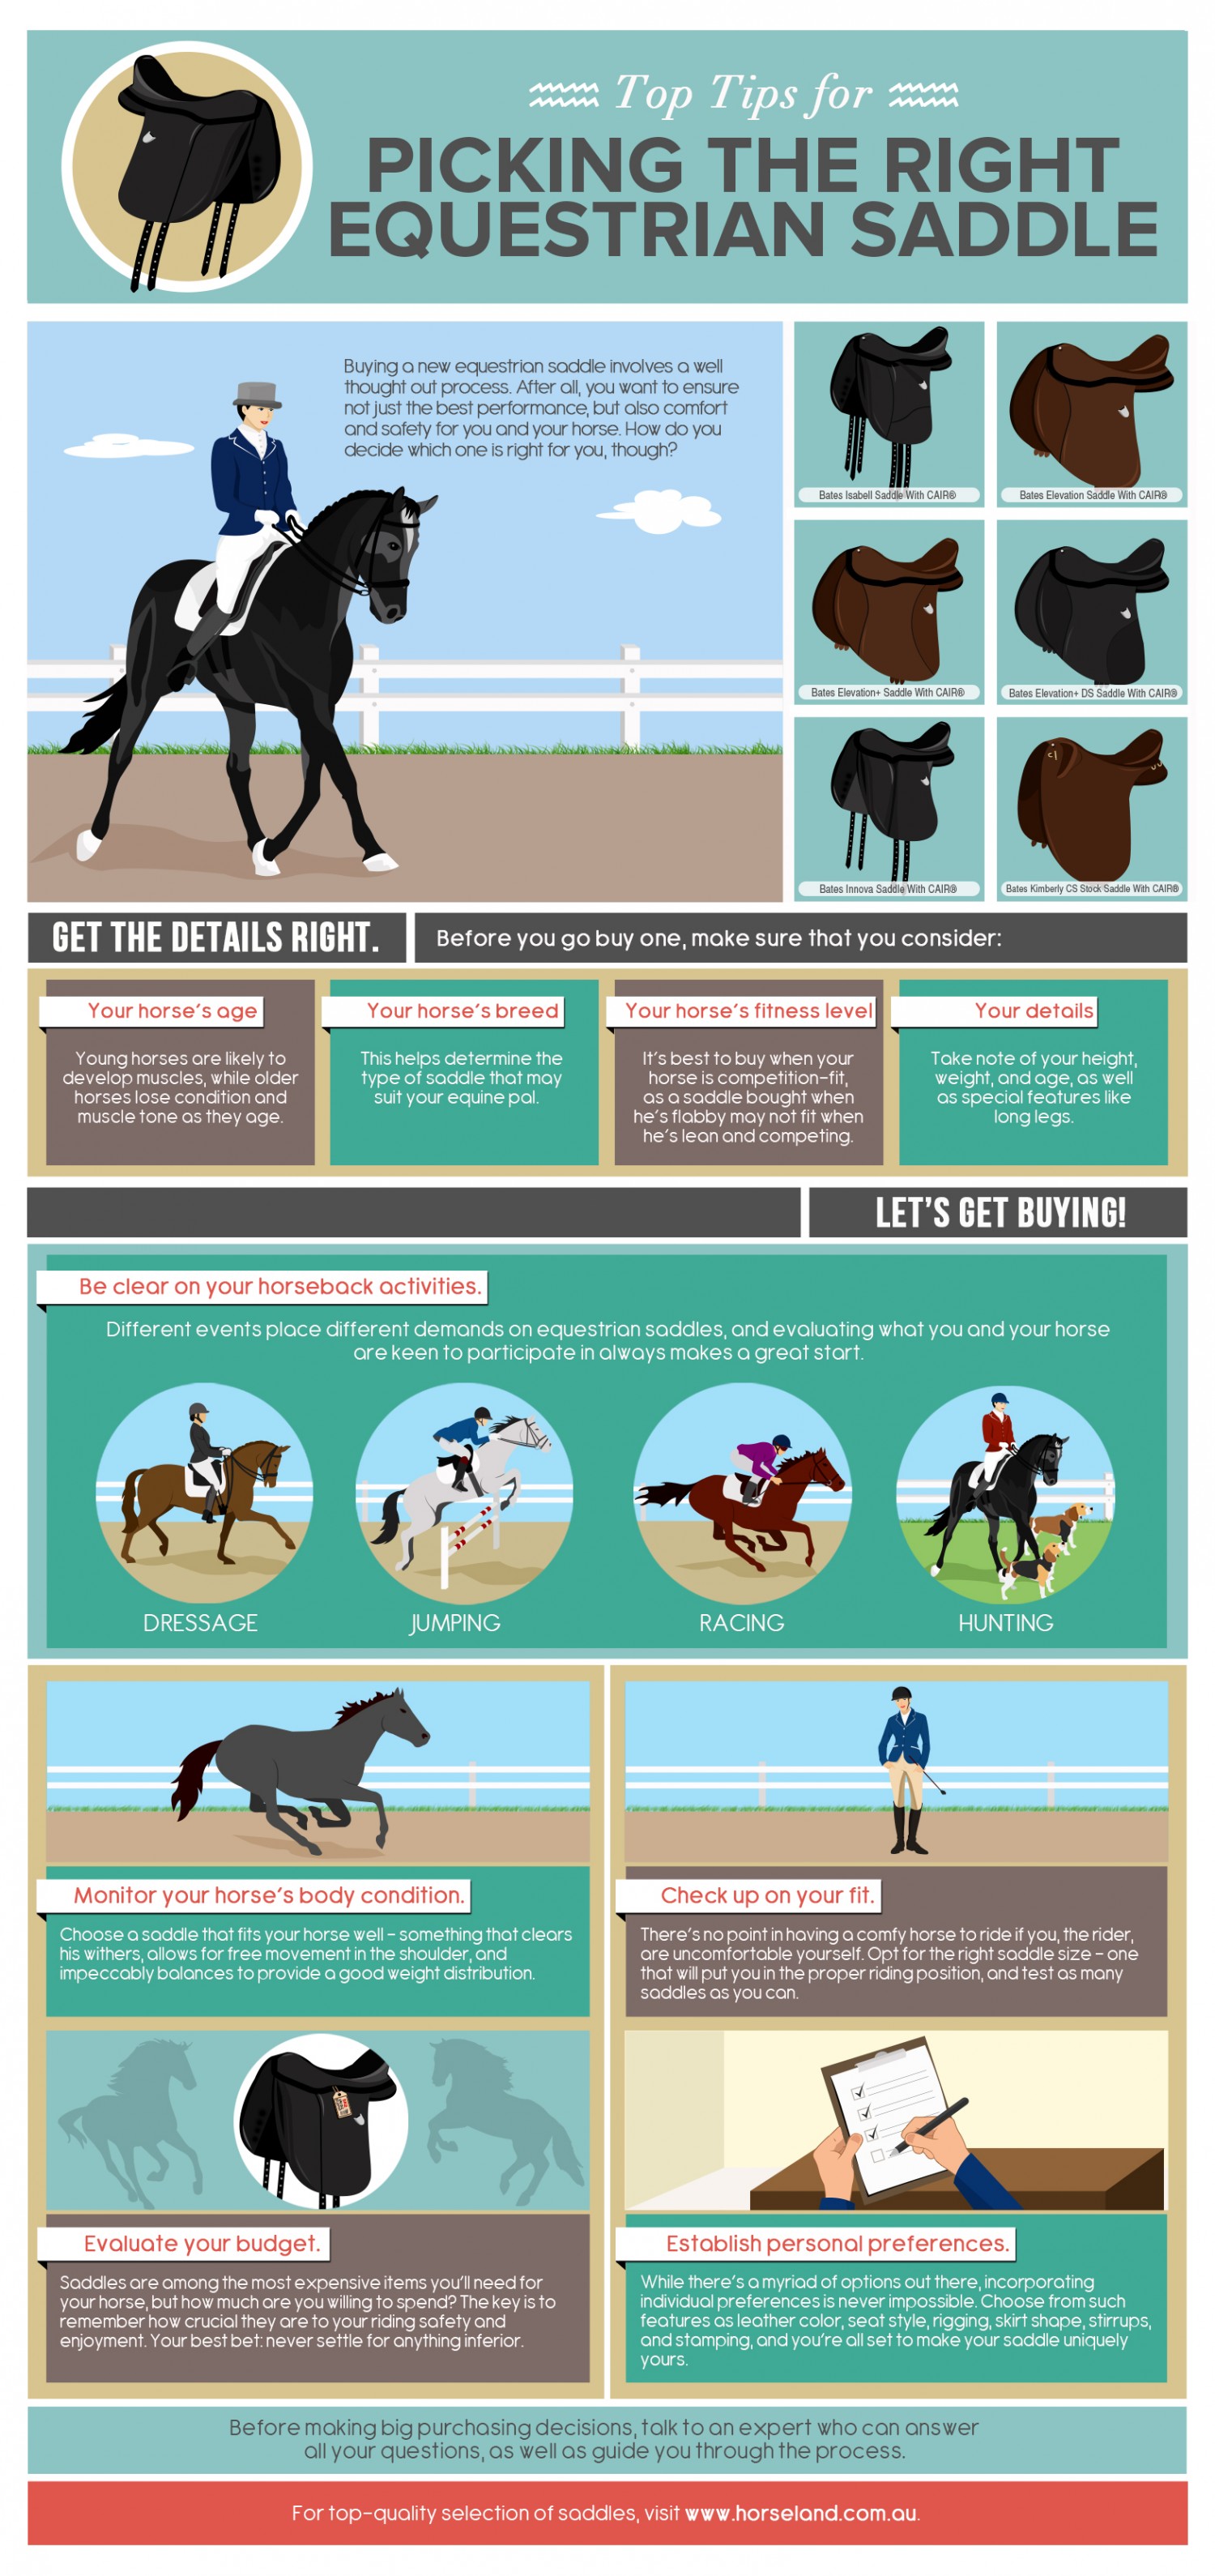 Picking The Right Equestrian Saddle